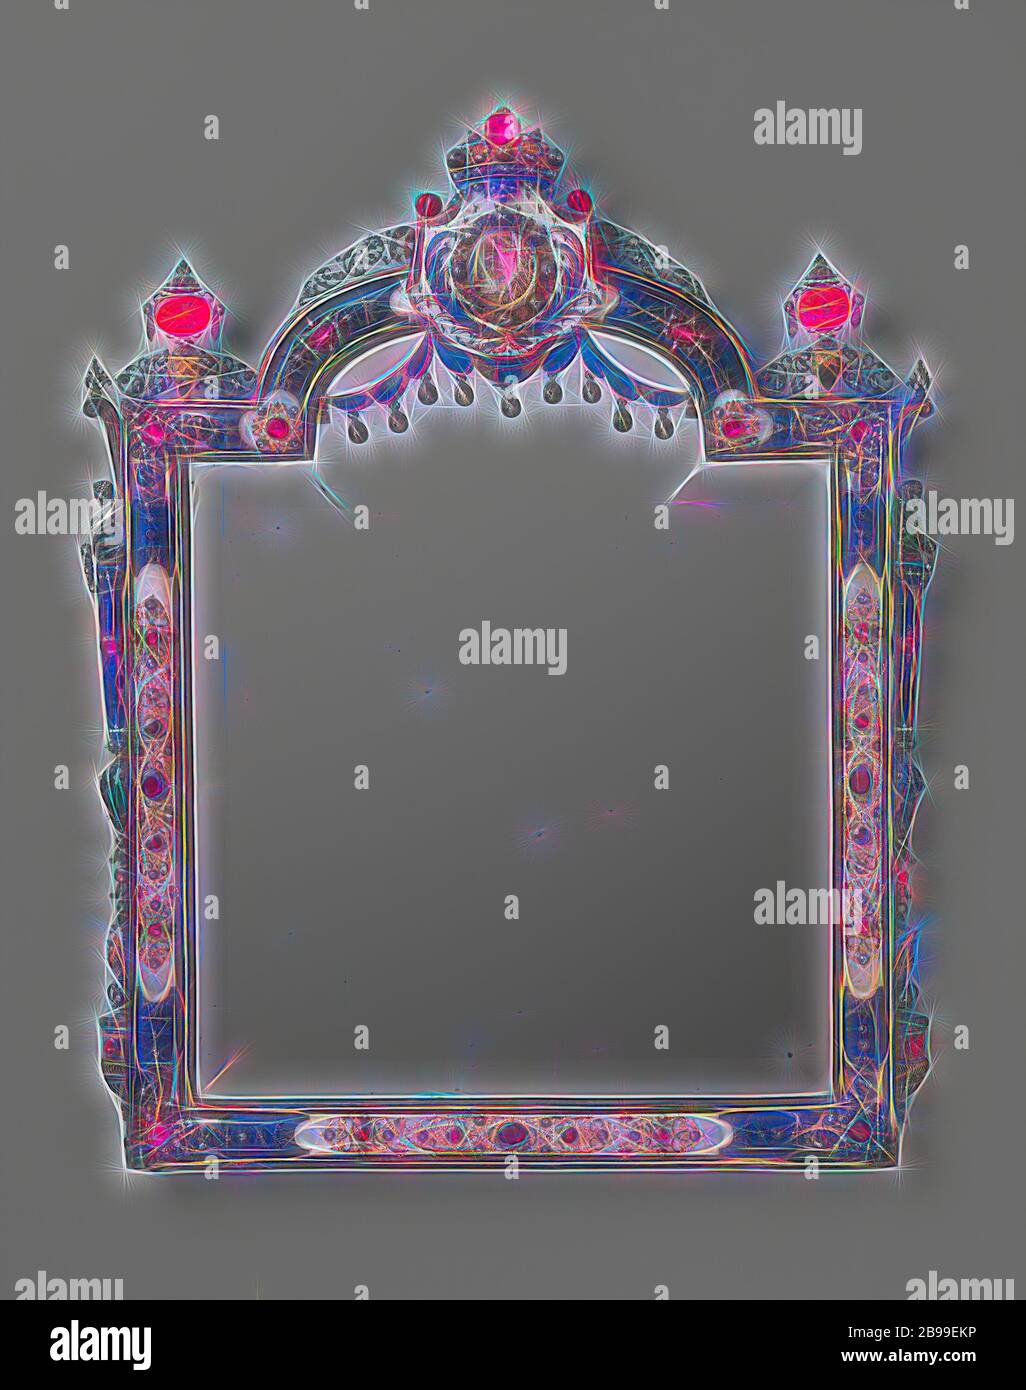 Mirror, standing model, with polished edges and in an openwork frame of gold and silver with mother-of-pearl ornaments, set with garnet and carnelian. On the back painted Chinoiseries, Standing mirror with polished edges in frame with openwork gold and silver ornaments on mother-of-pearl, set with grenades, carnelian. Chinoiseries painted on the back., anonymous, Dresden, c. 1700, gold (metal), silver (metal), mother of pearl, garnet (mineral), carnelian, glass, amalgam, h 45.0 cm Ã— w 36.5 cm Ã— d 3.0 cm, Reimagined by Gibon, design of warm cheerful glowing of brightness and light rays radian Stock Photo